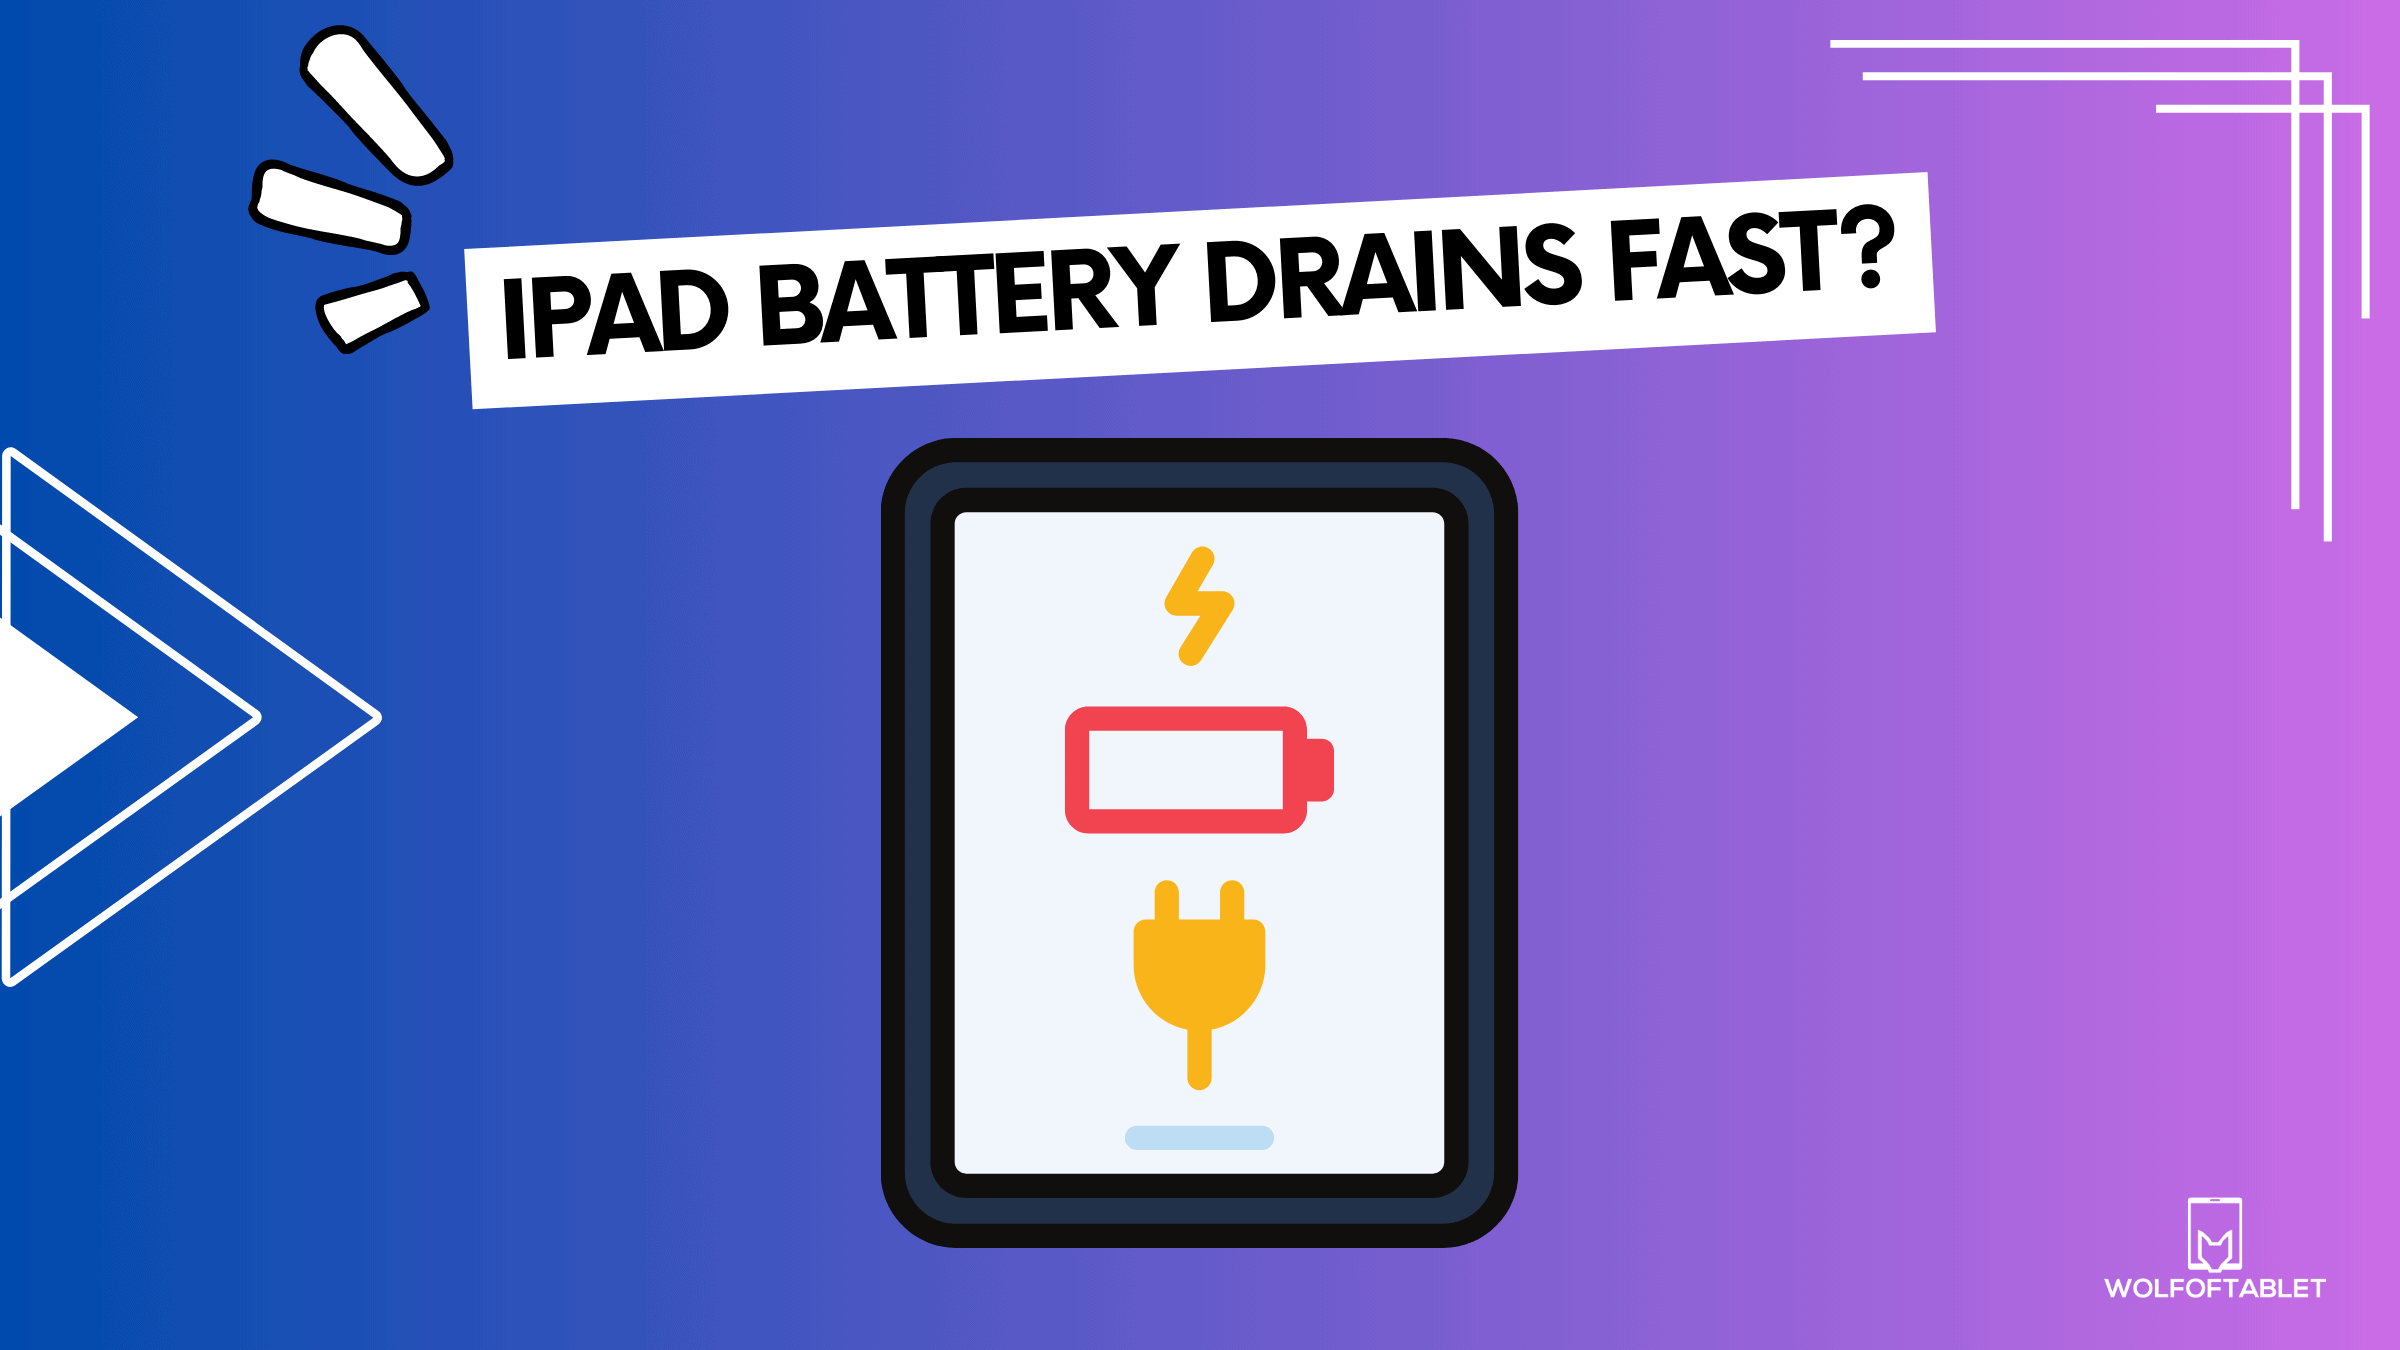 ipad battery drains fast - here how you can fix it